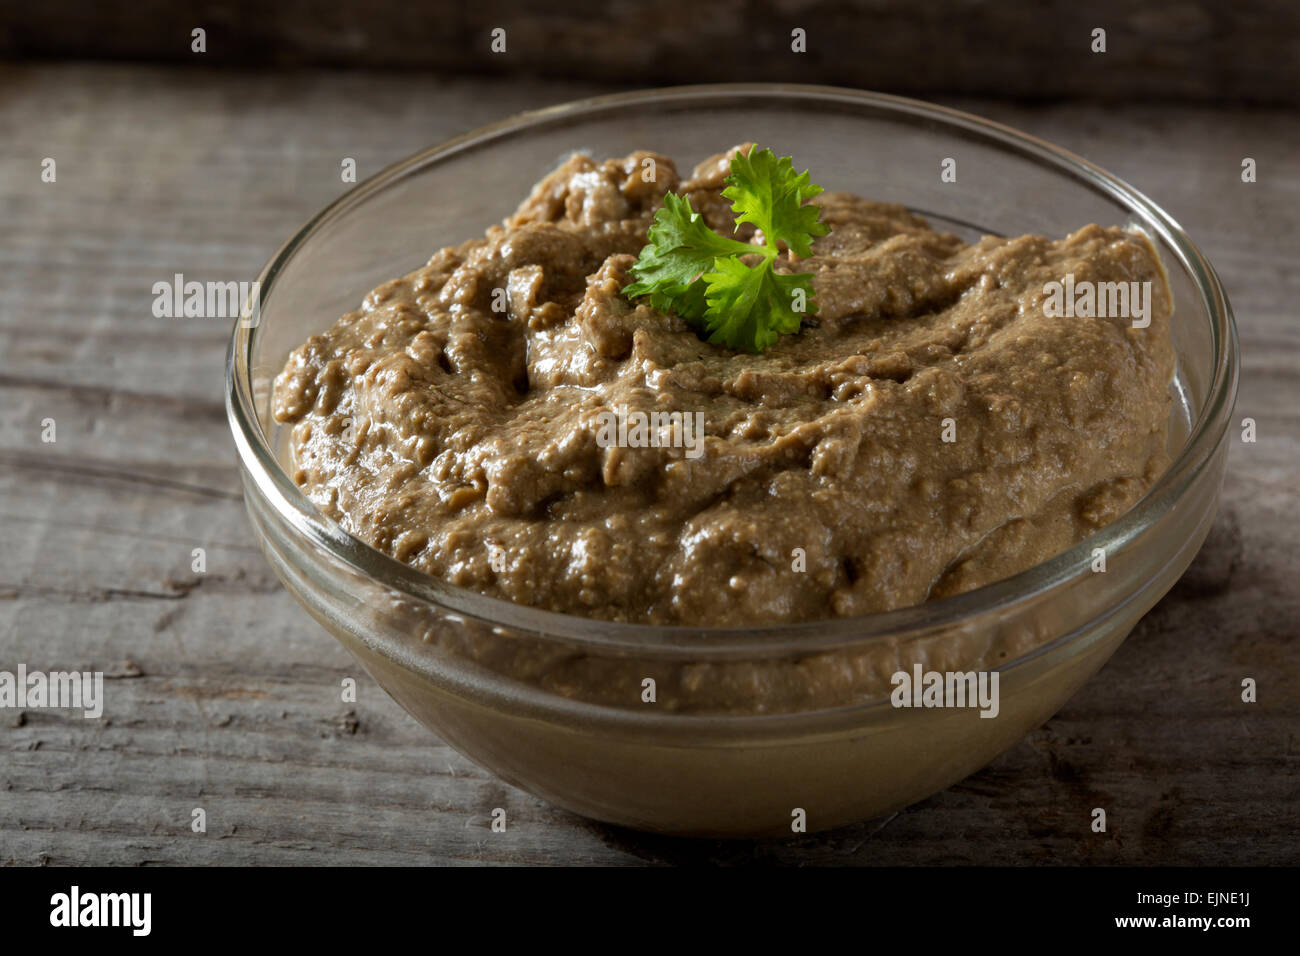 Bowl of liver pate over wooden background Stock Photo